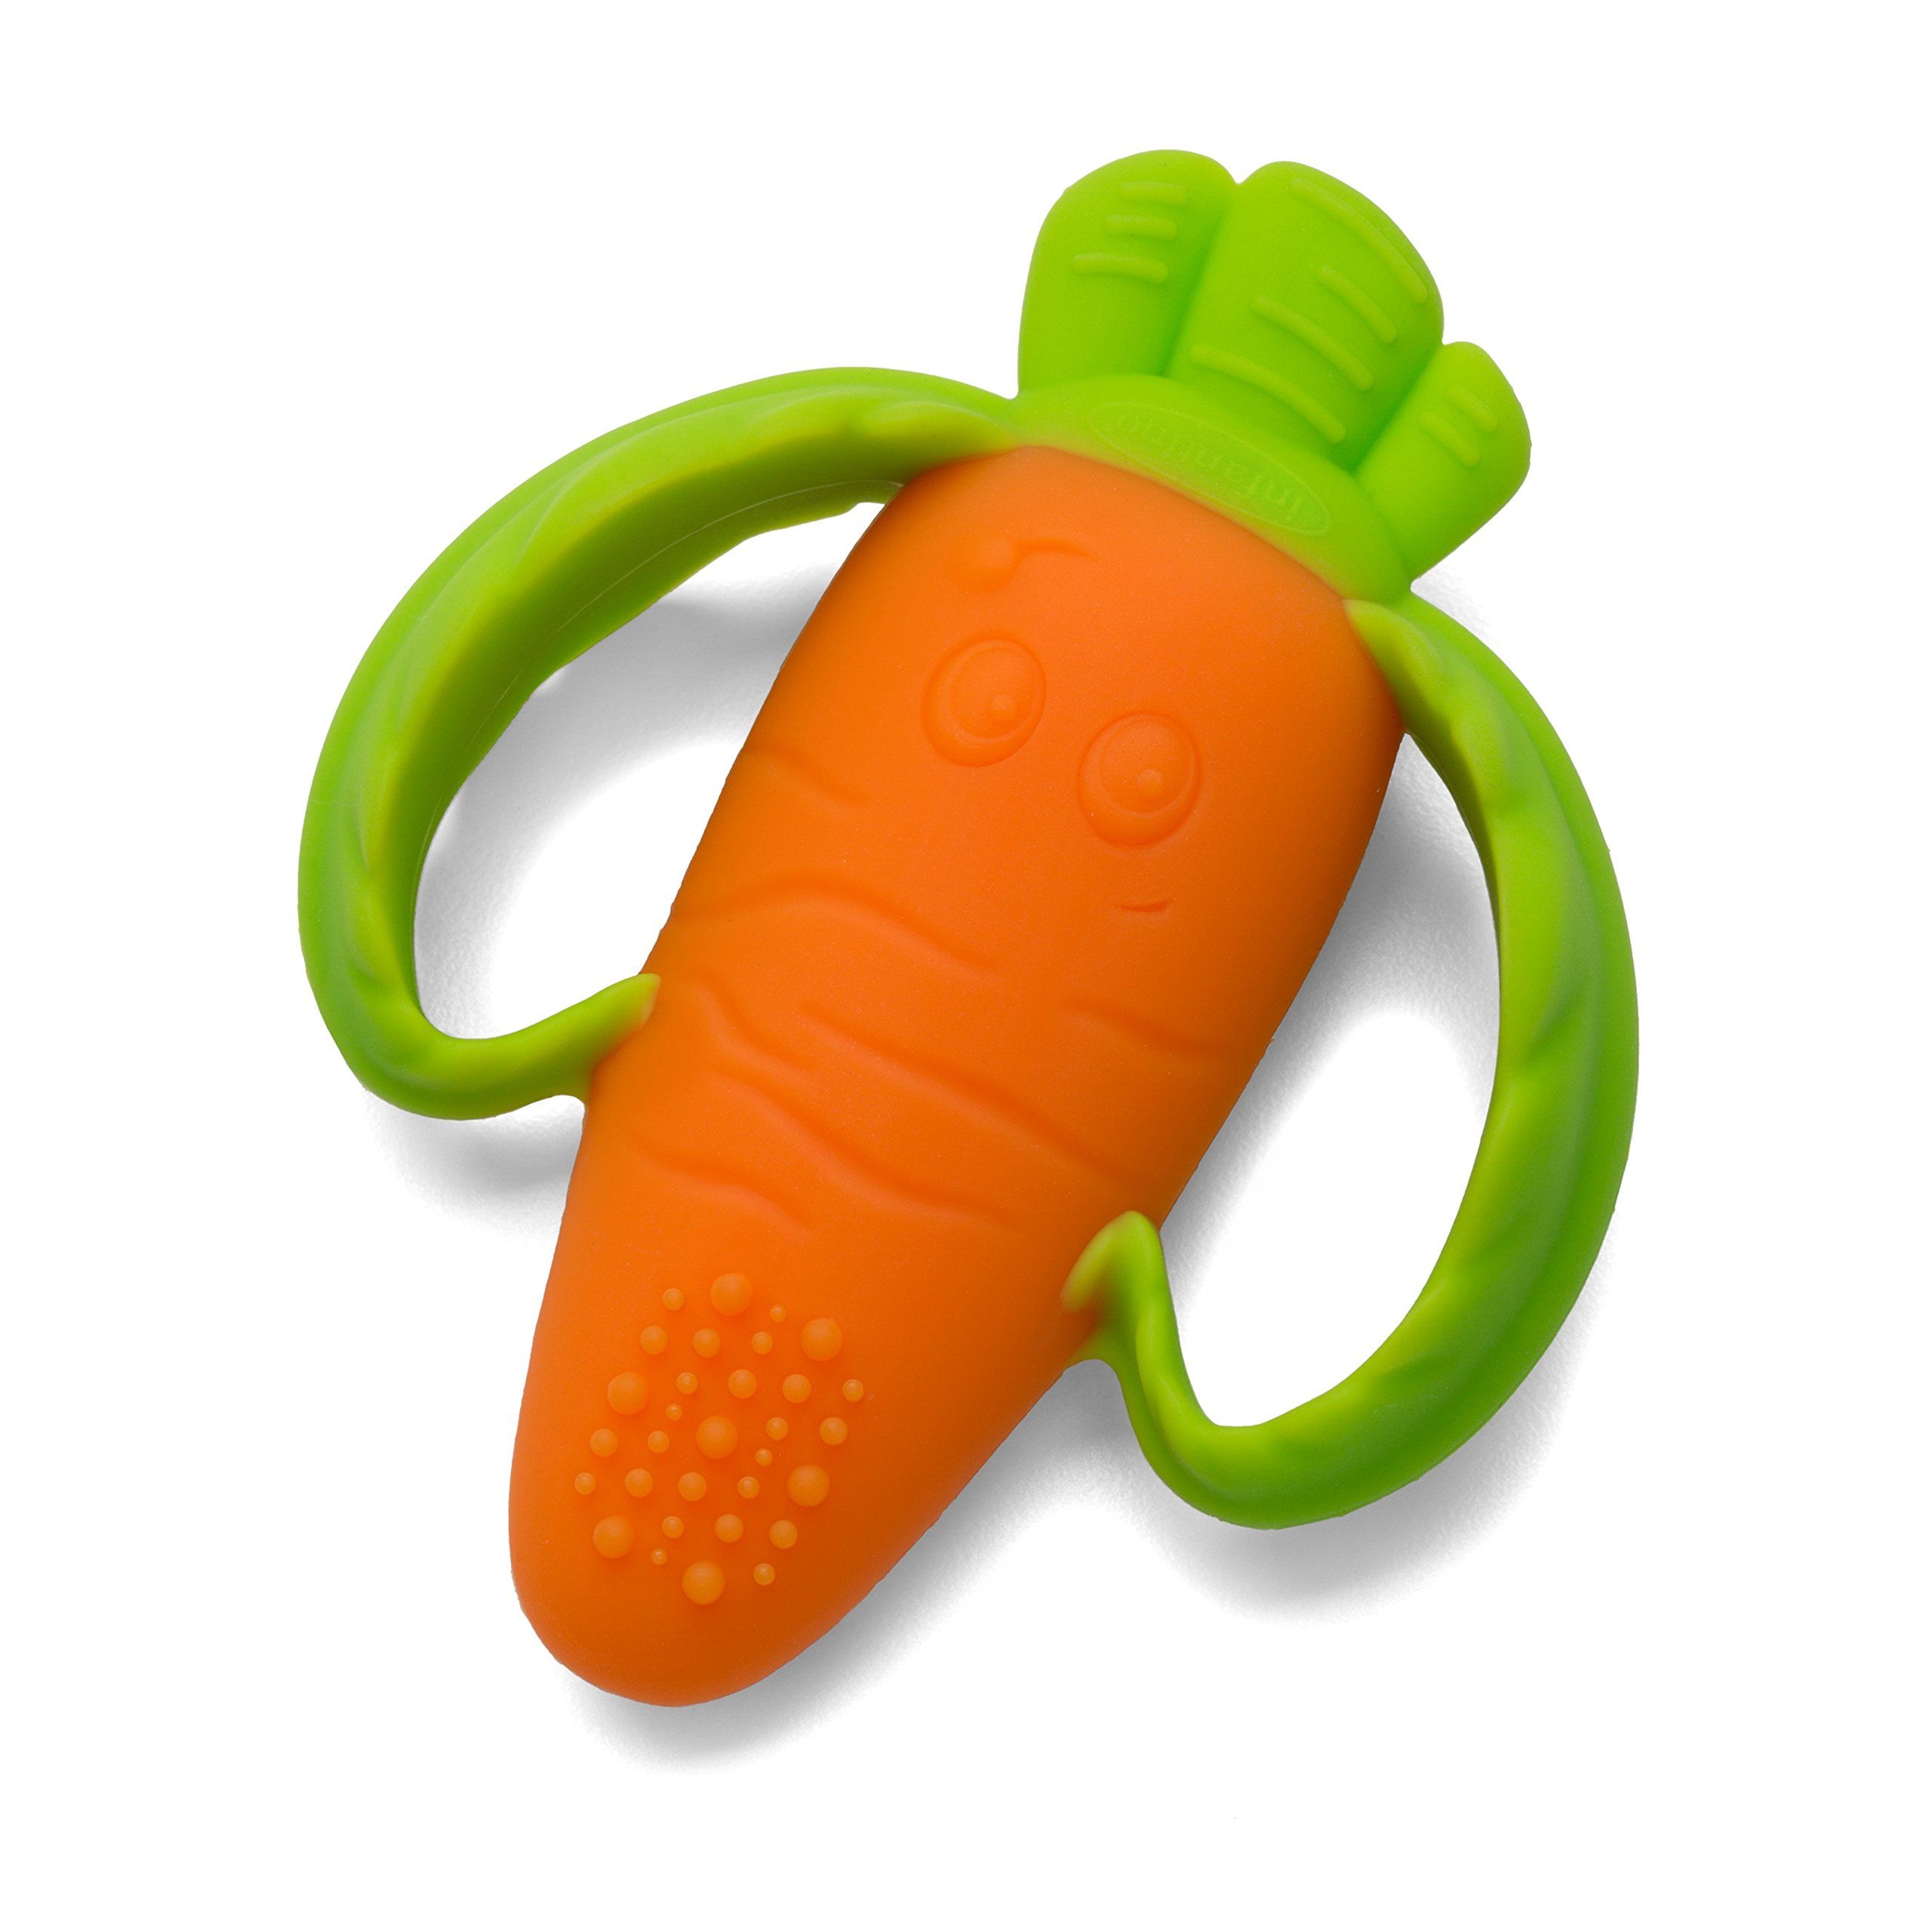 Infantino Lil' Nibbles Textured Silicone Baby Teether - Sensory Exploration and Teething Relief with Easy to Hold Handles, Orange Carrot, 0+ Months | Amazon (US)